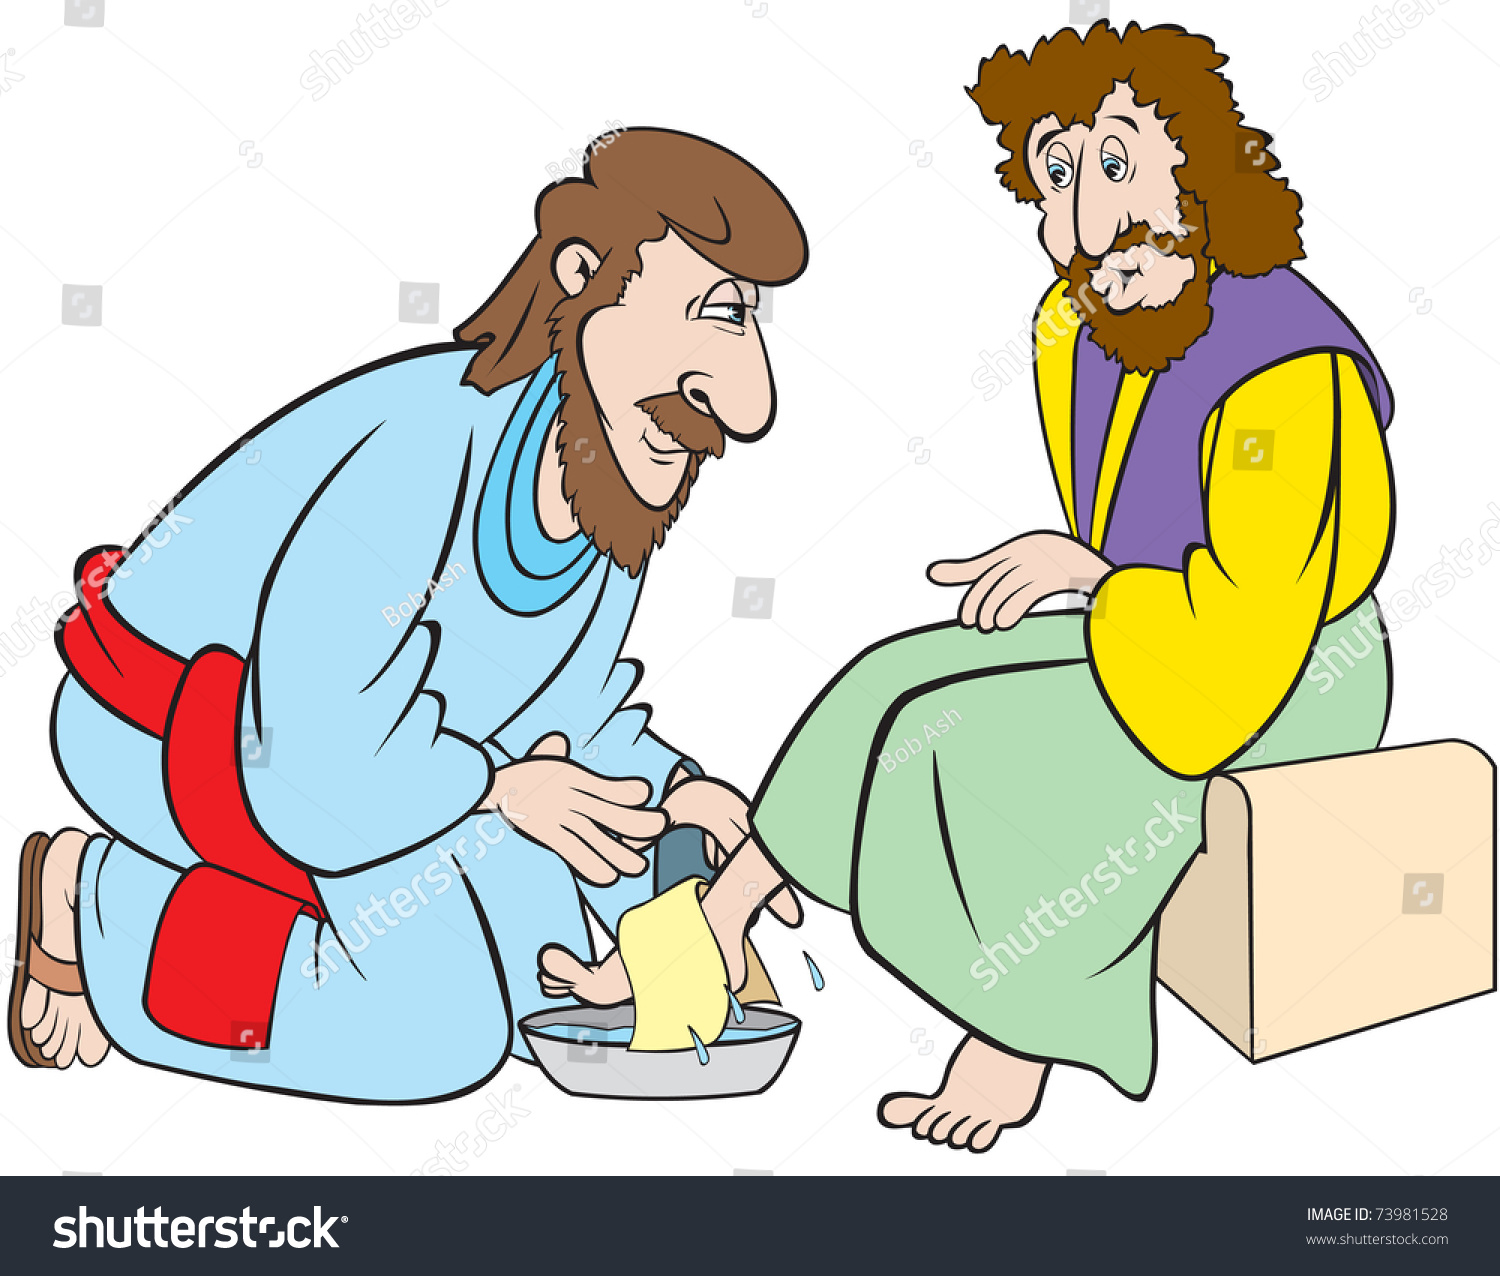 jesus washing the disciples feet clipart - photo #33